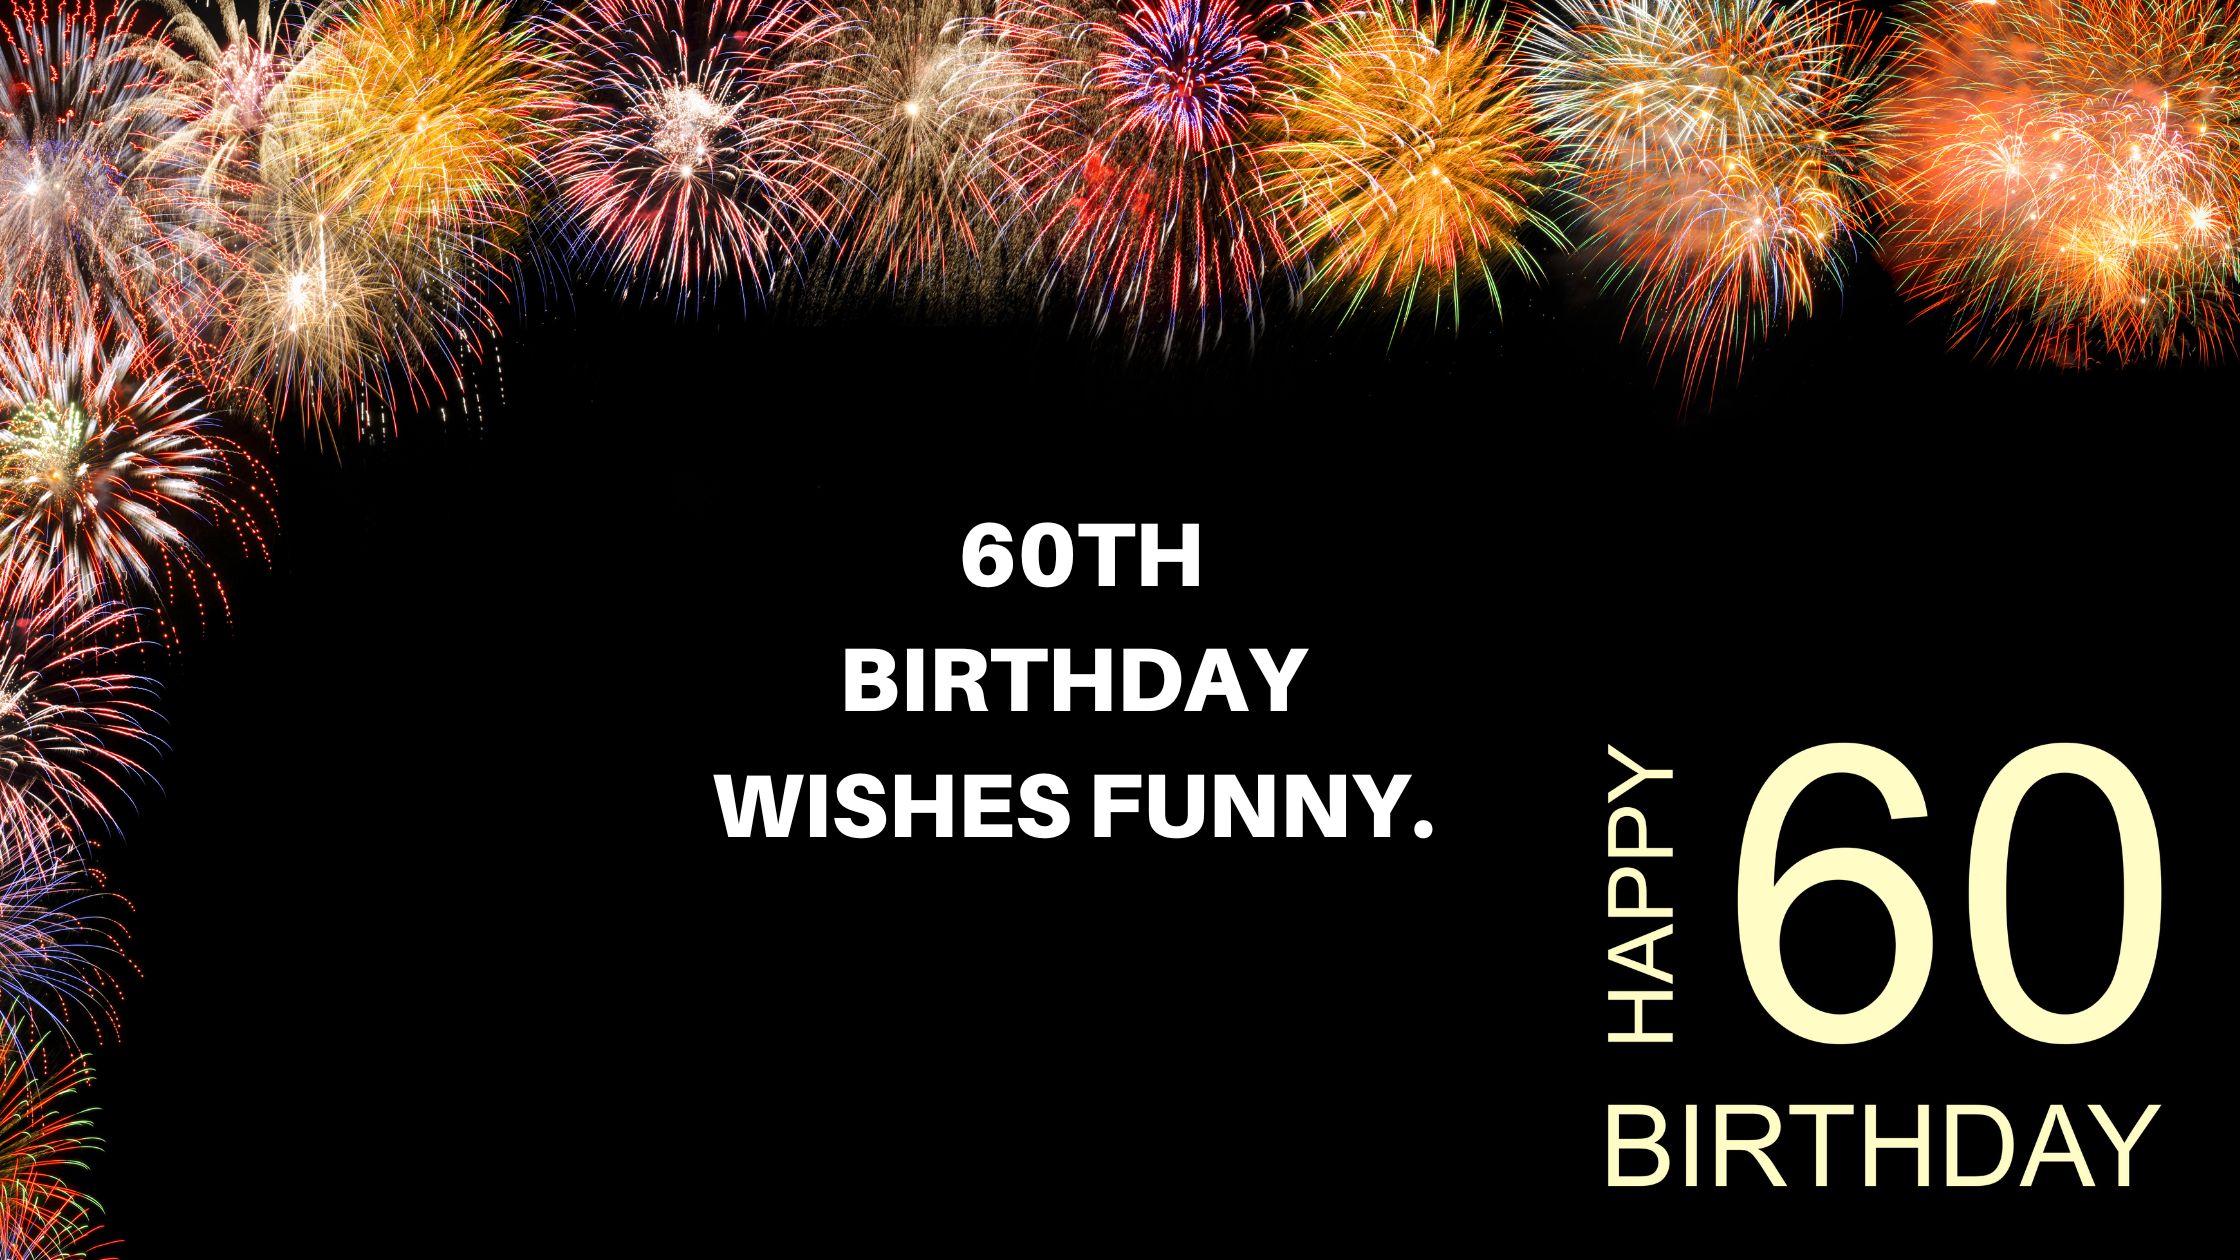 60th Birthday Wishes Funny